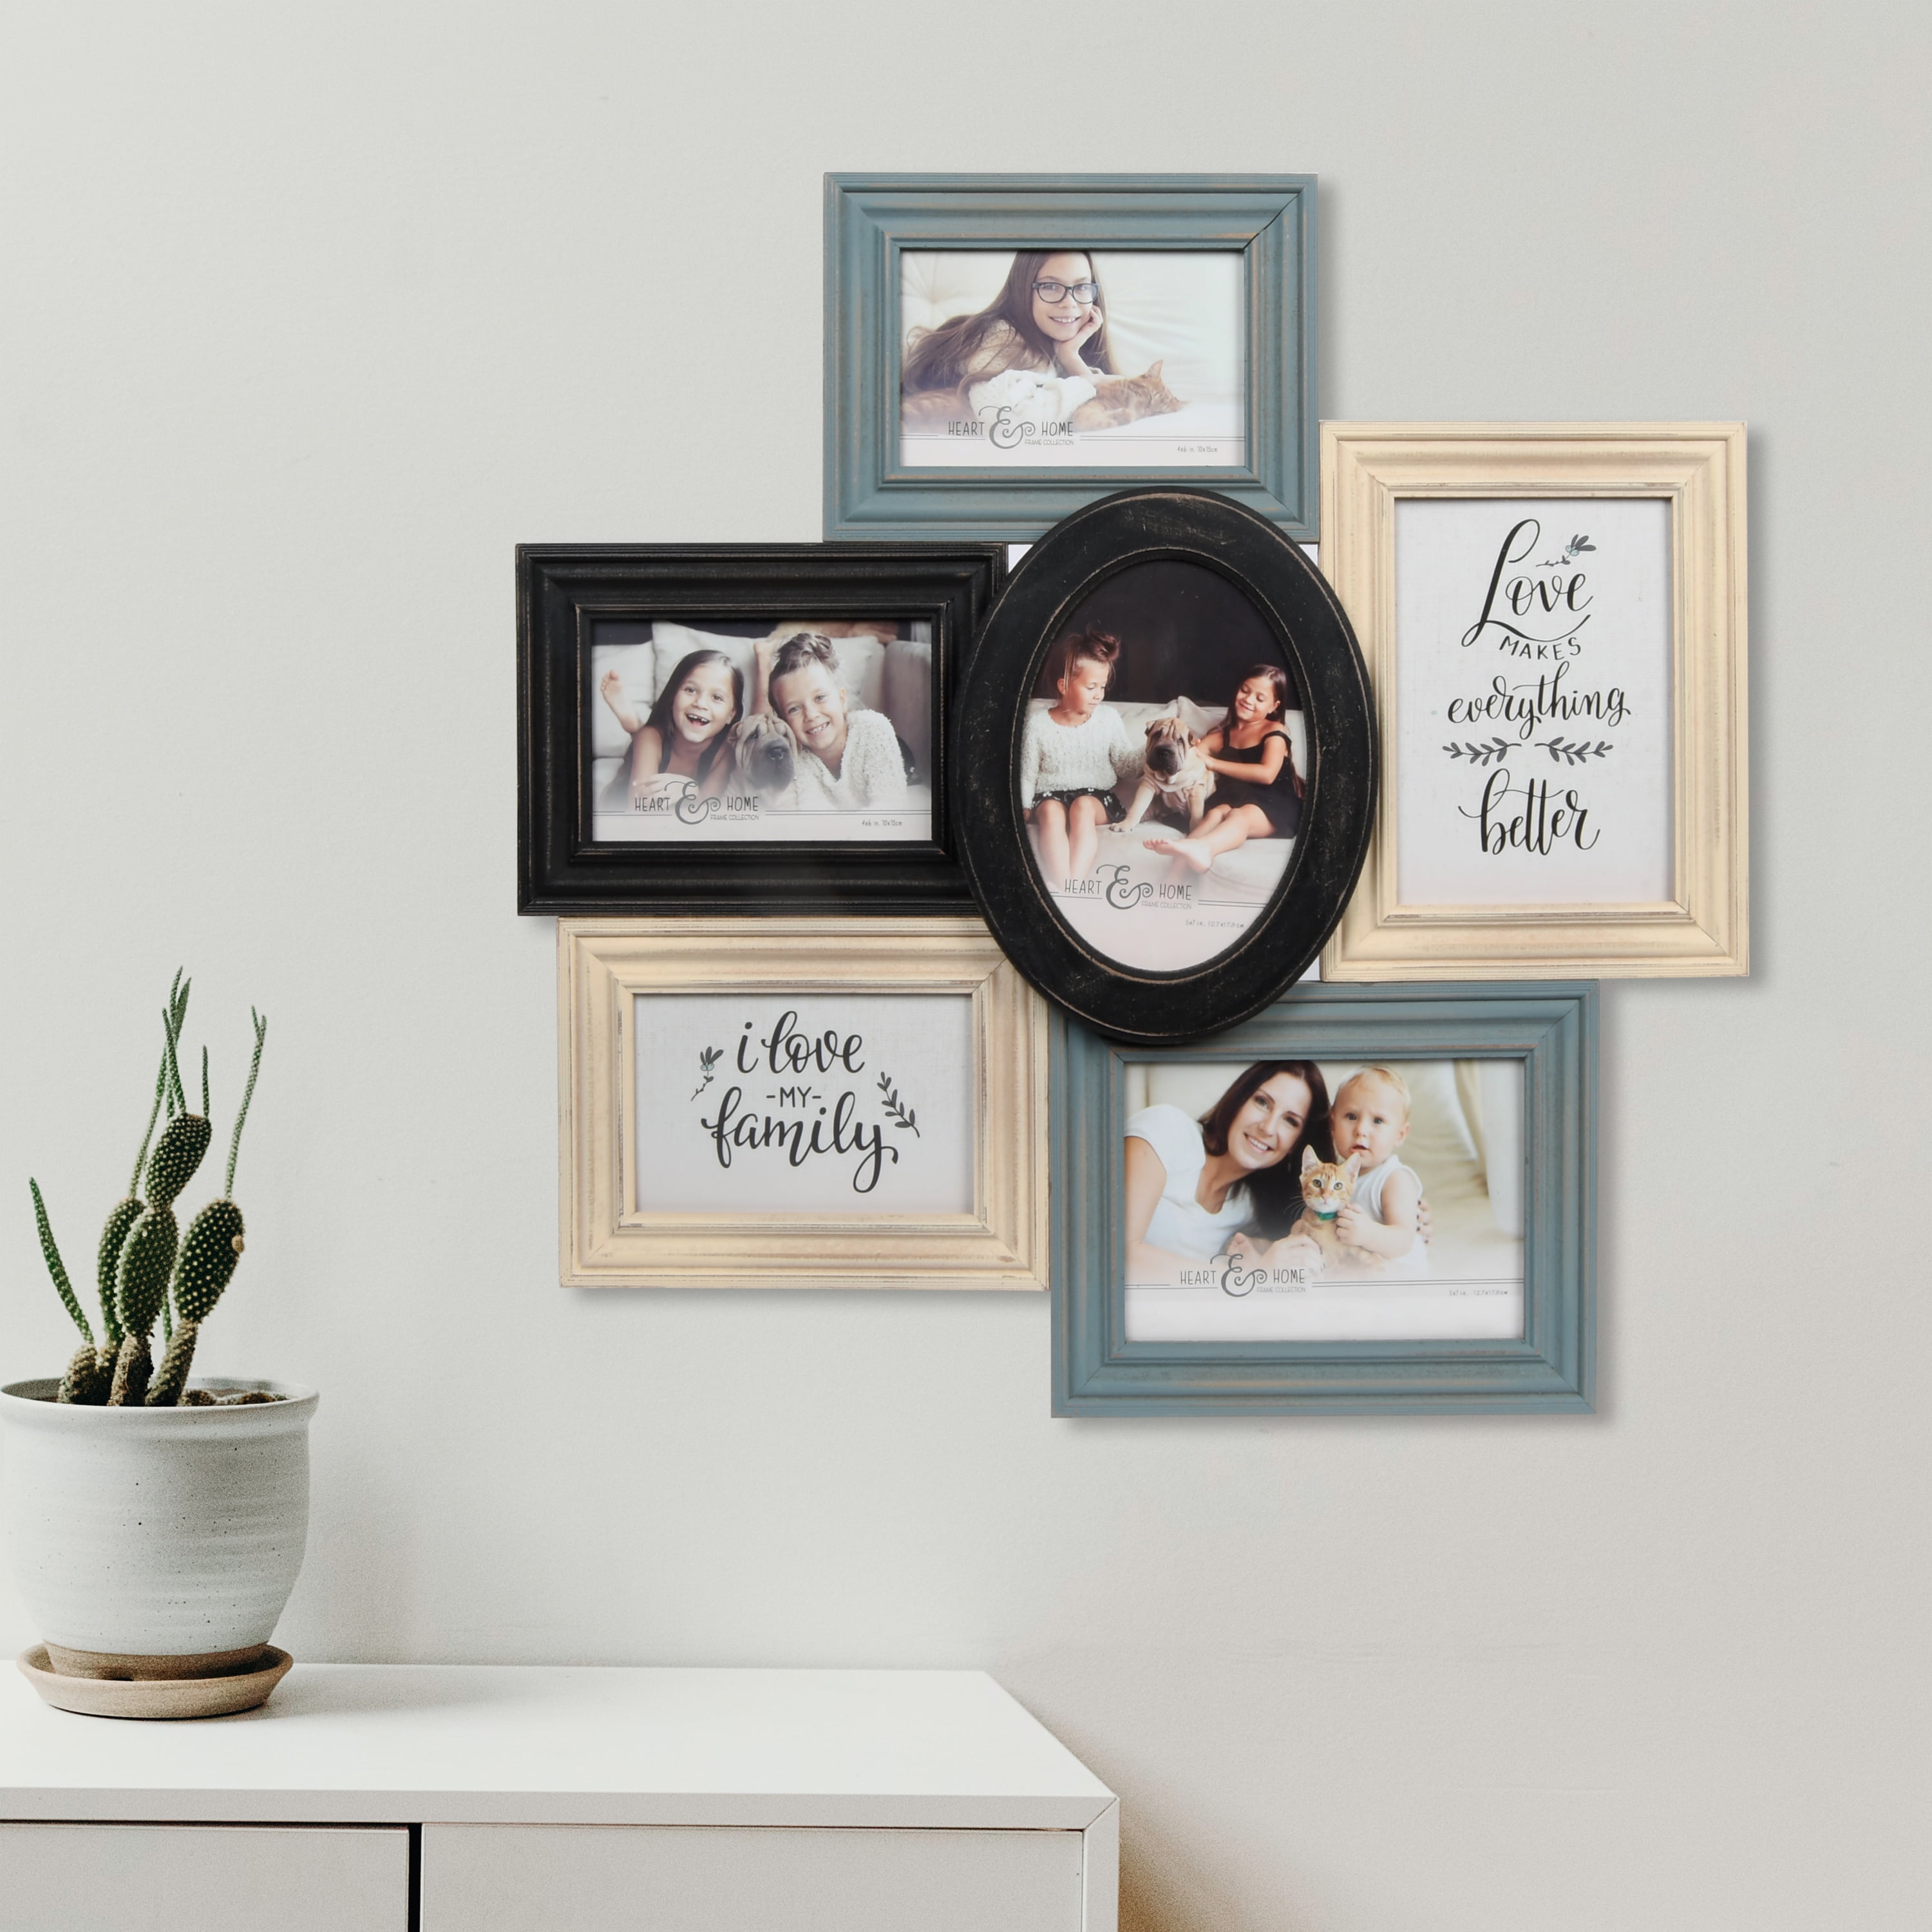 Gallery Wall Frame Set of 6, Multi-Size Picture Frames Collage